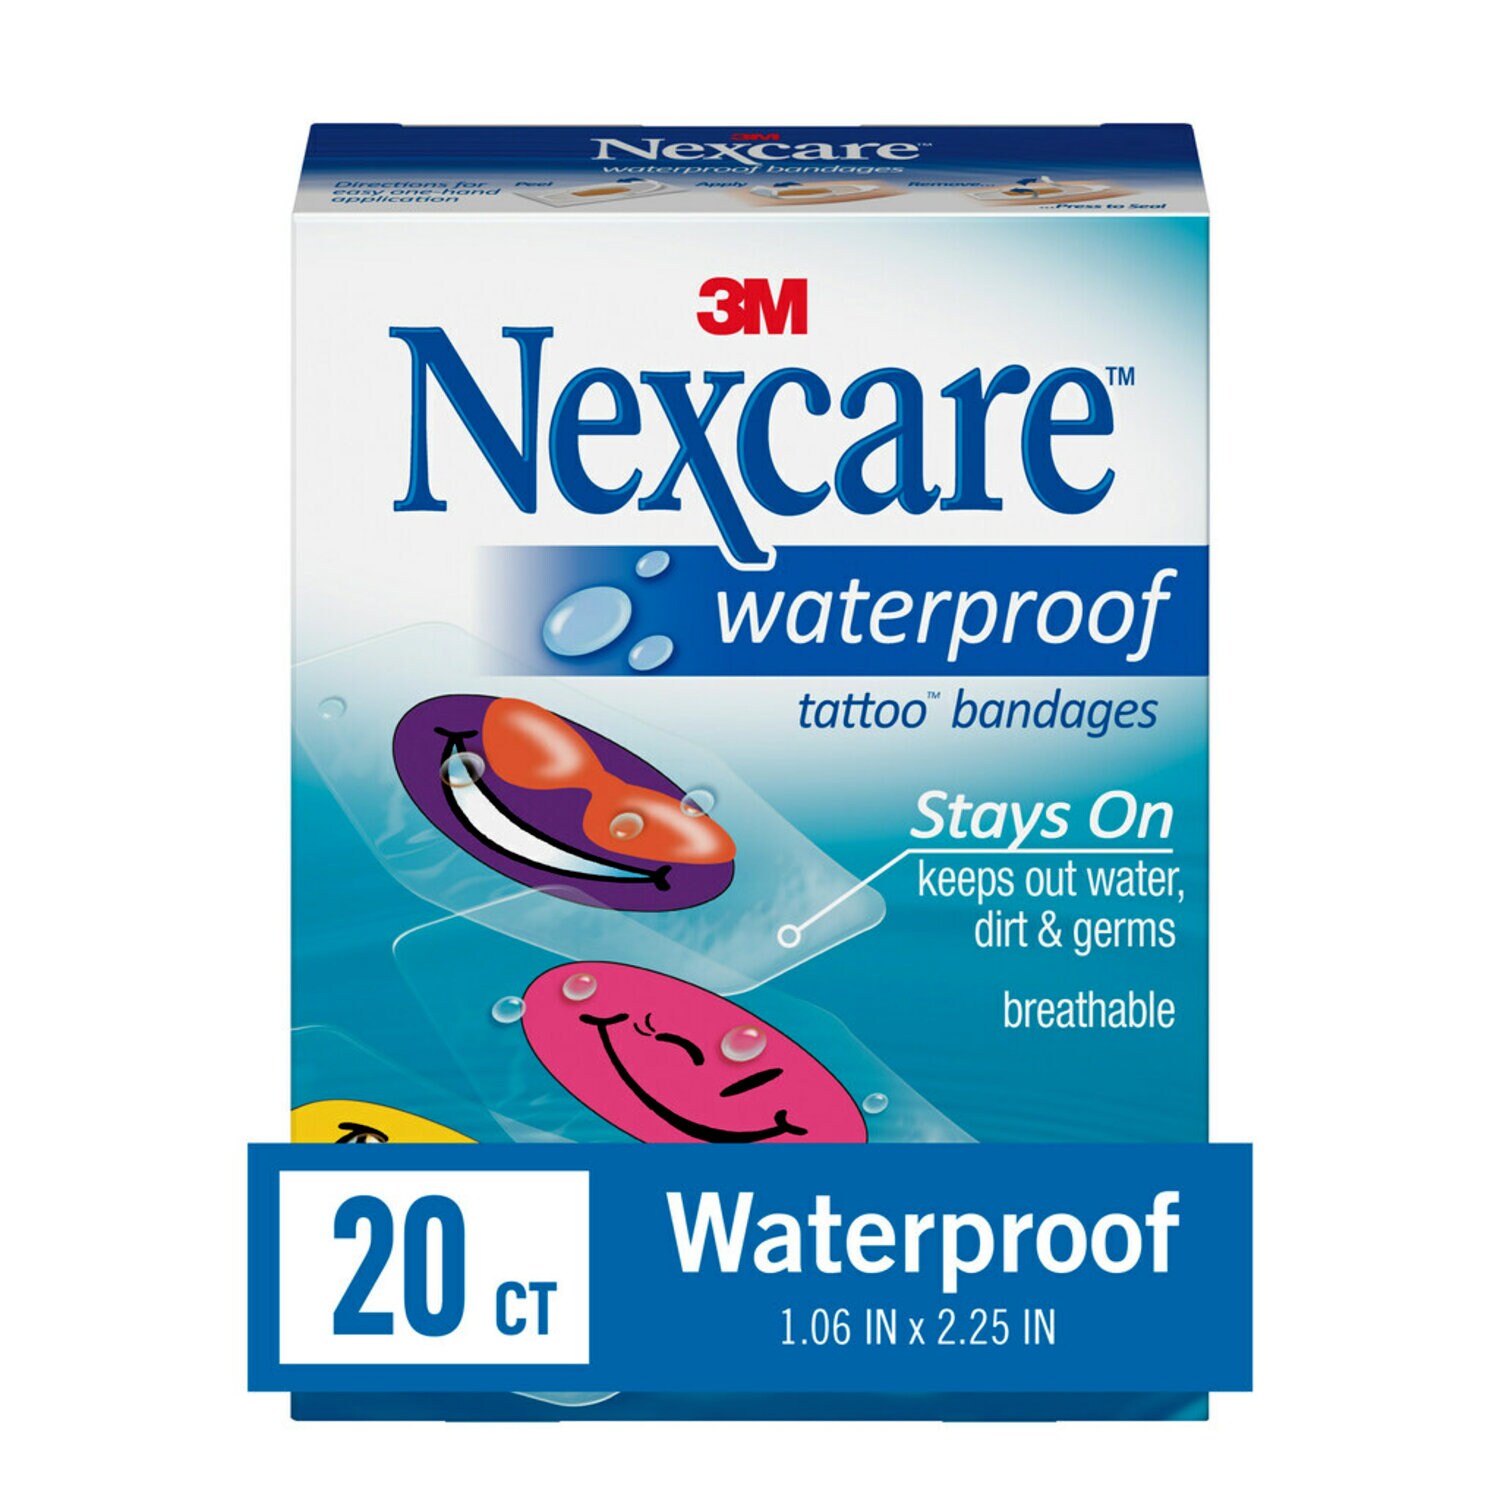 7100049015 - Nexcare Waterproof Bandages, Cool Collection 594-20